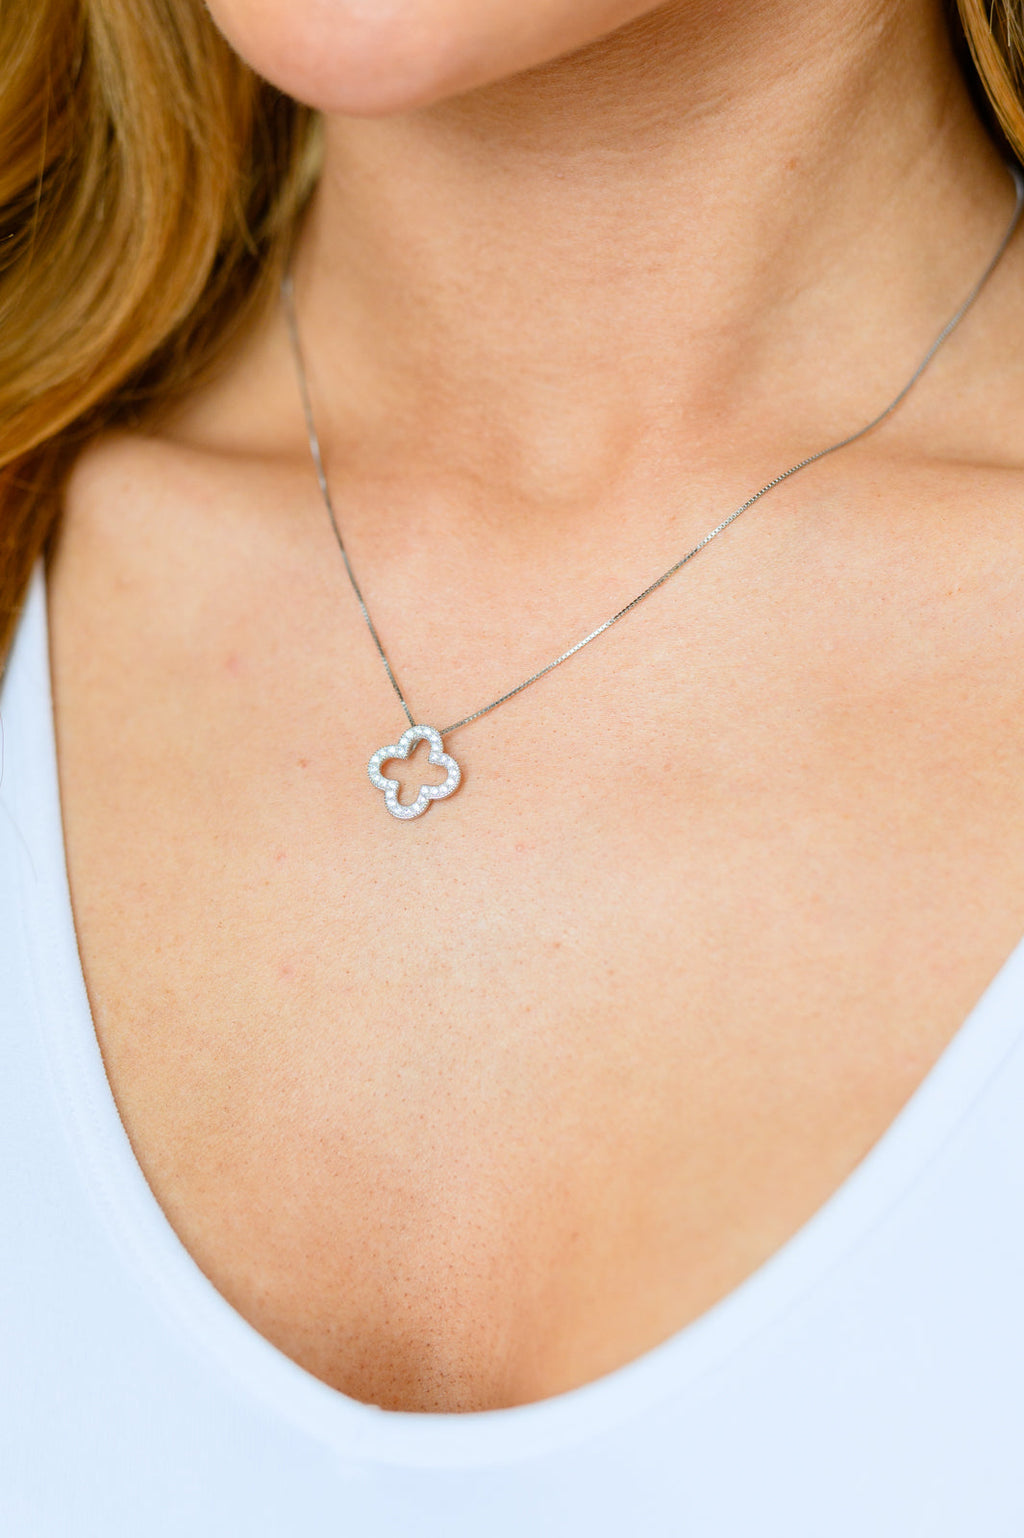 Pure Luck Sterling Silver Pendent Necklace